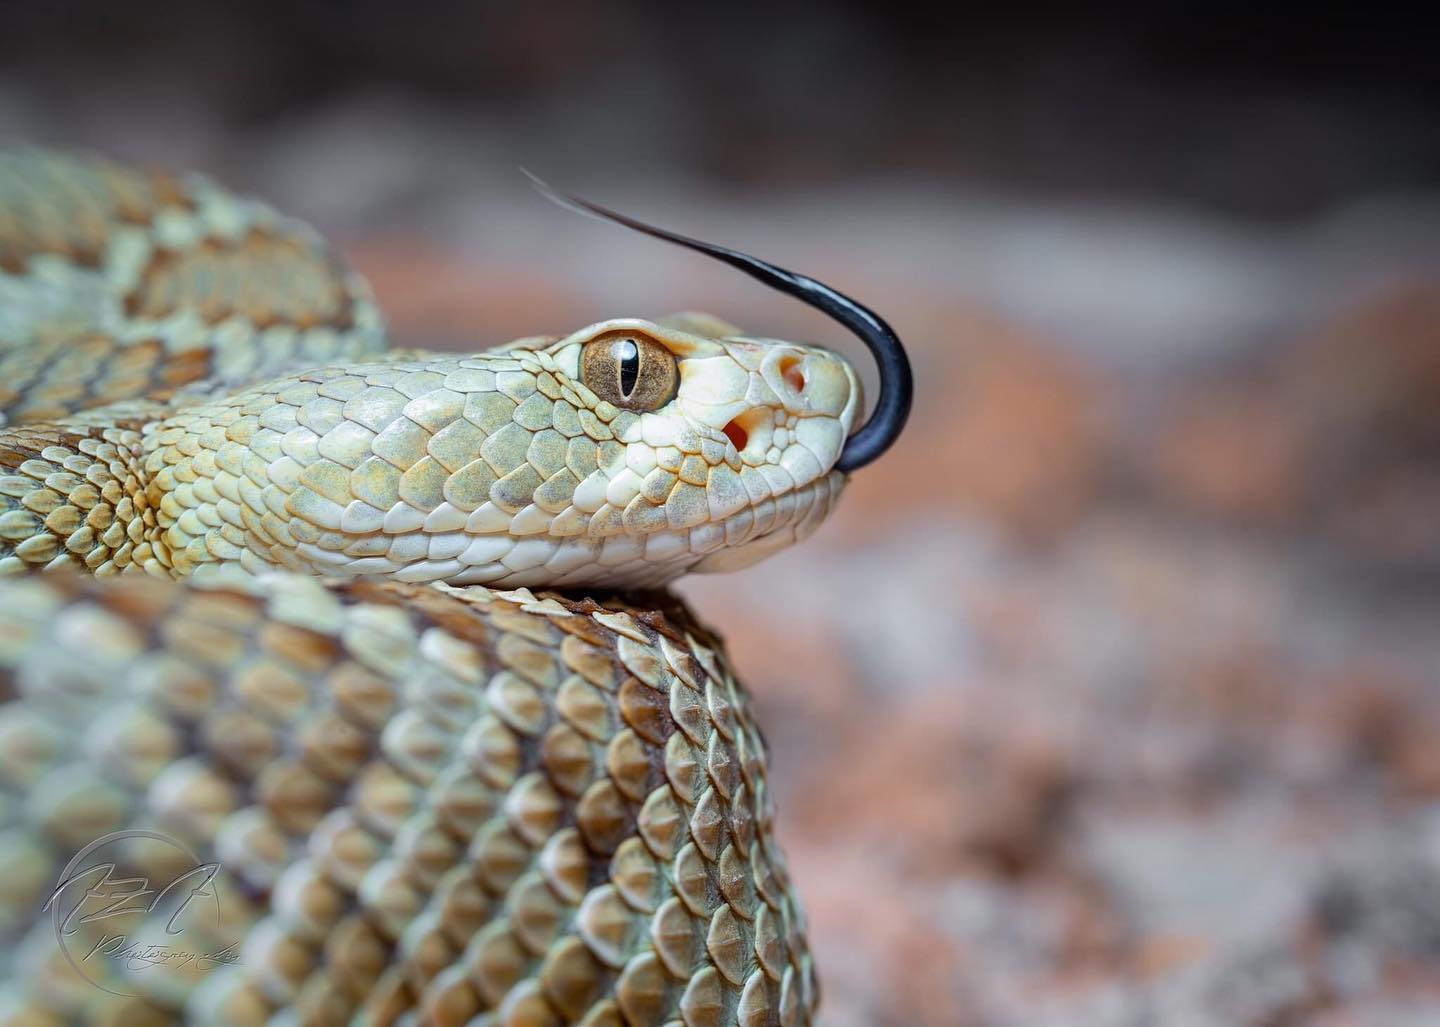 A closeup photo of the head of a mohave rattlsnake which is sticking its tongue out. The snake is cream colored with tan diamond shaked markings.